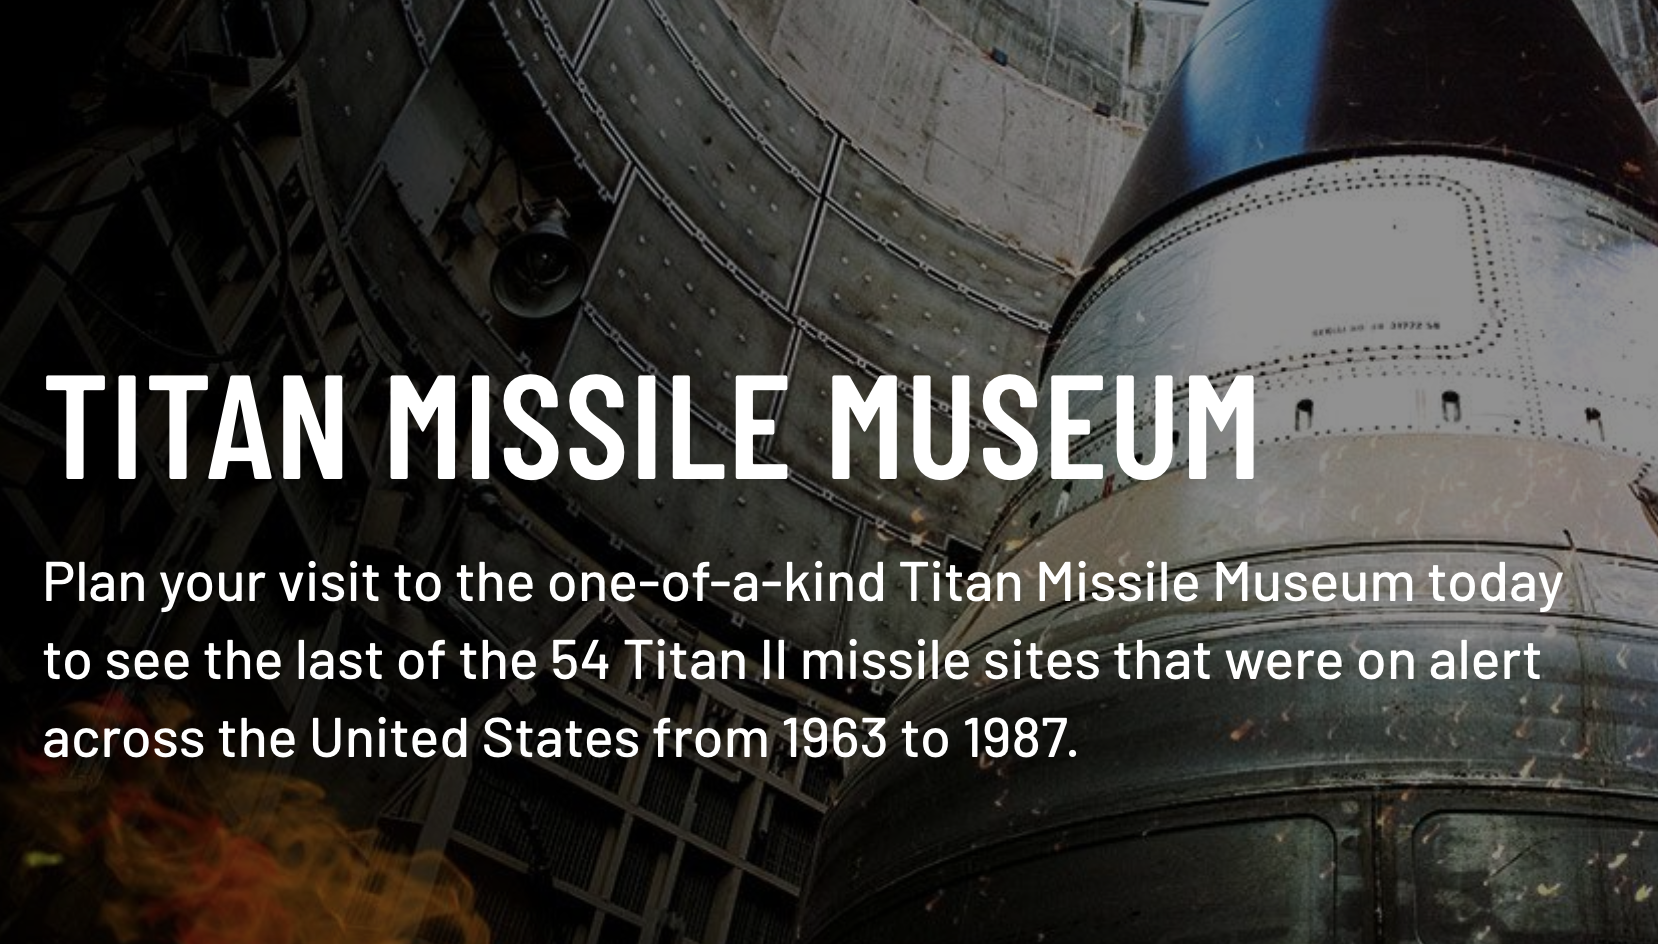 Click here to go to the Titan Missile Museum website and learn more about the Titan II missile